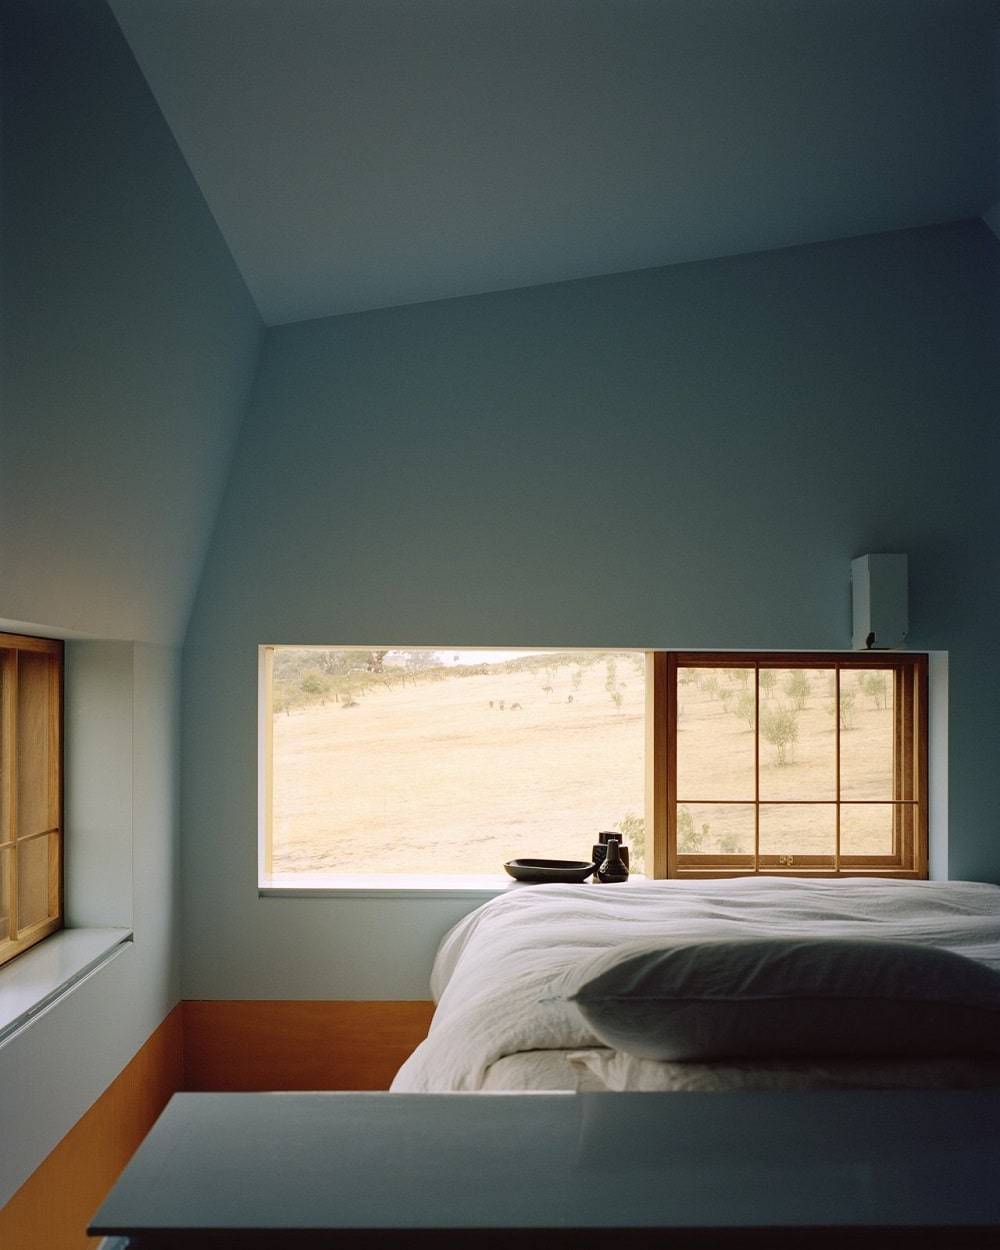 Farm Living in Rural Australia shot by Rory Gardiner Architects Partners Hill